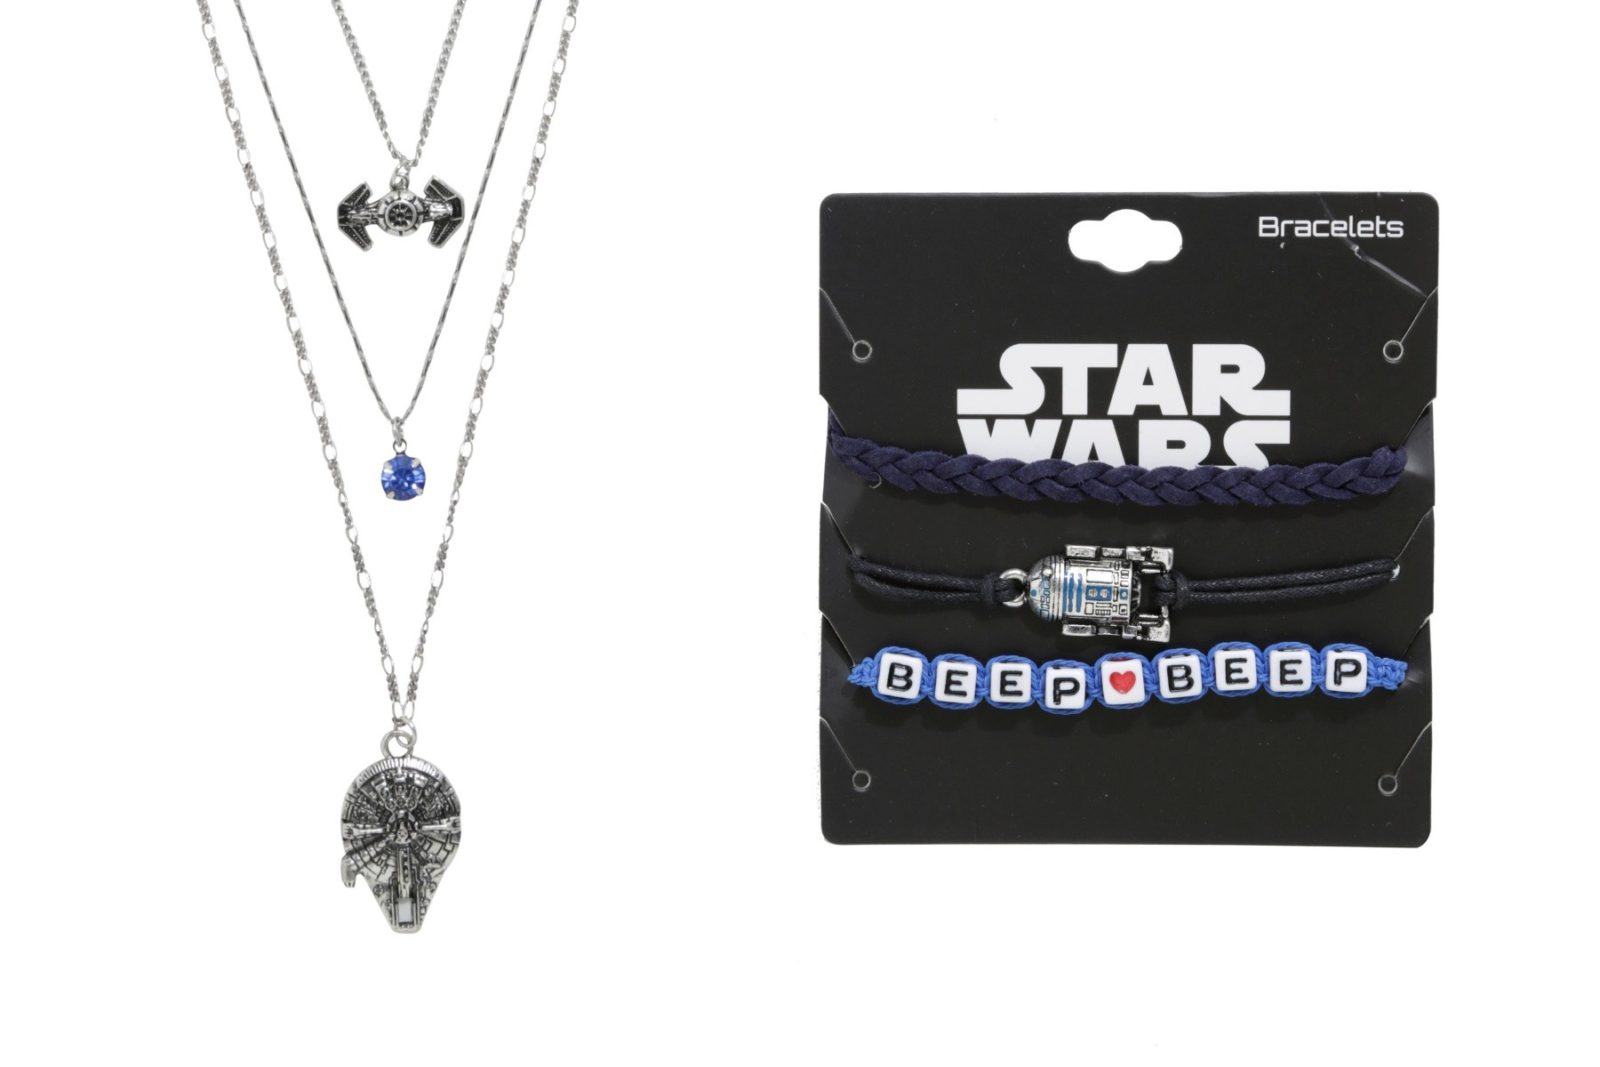 New Star Wars jewelry at Hot Topic